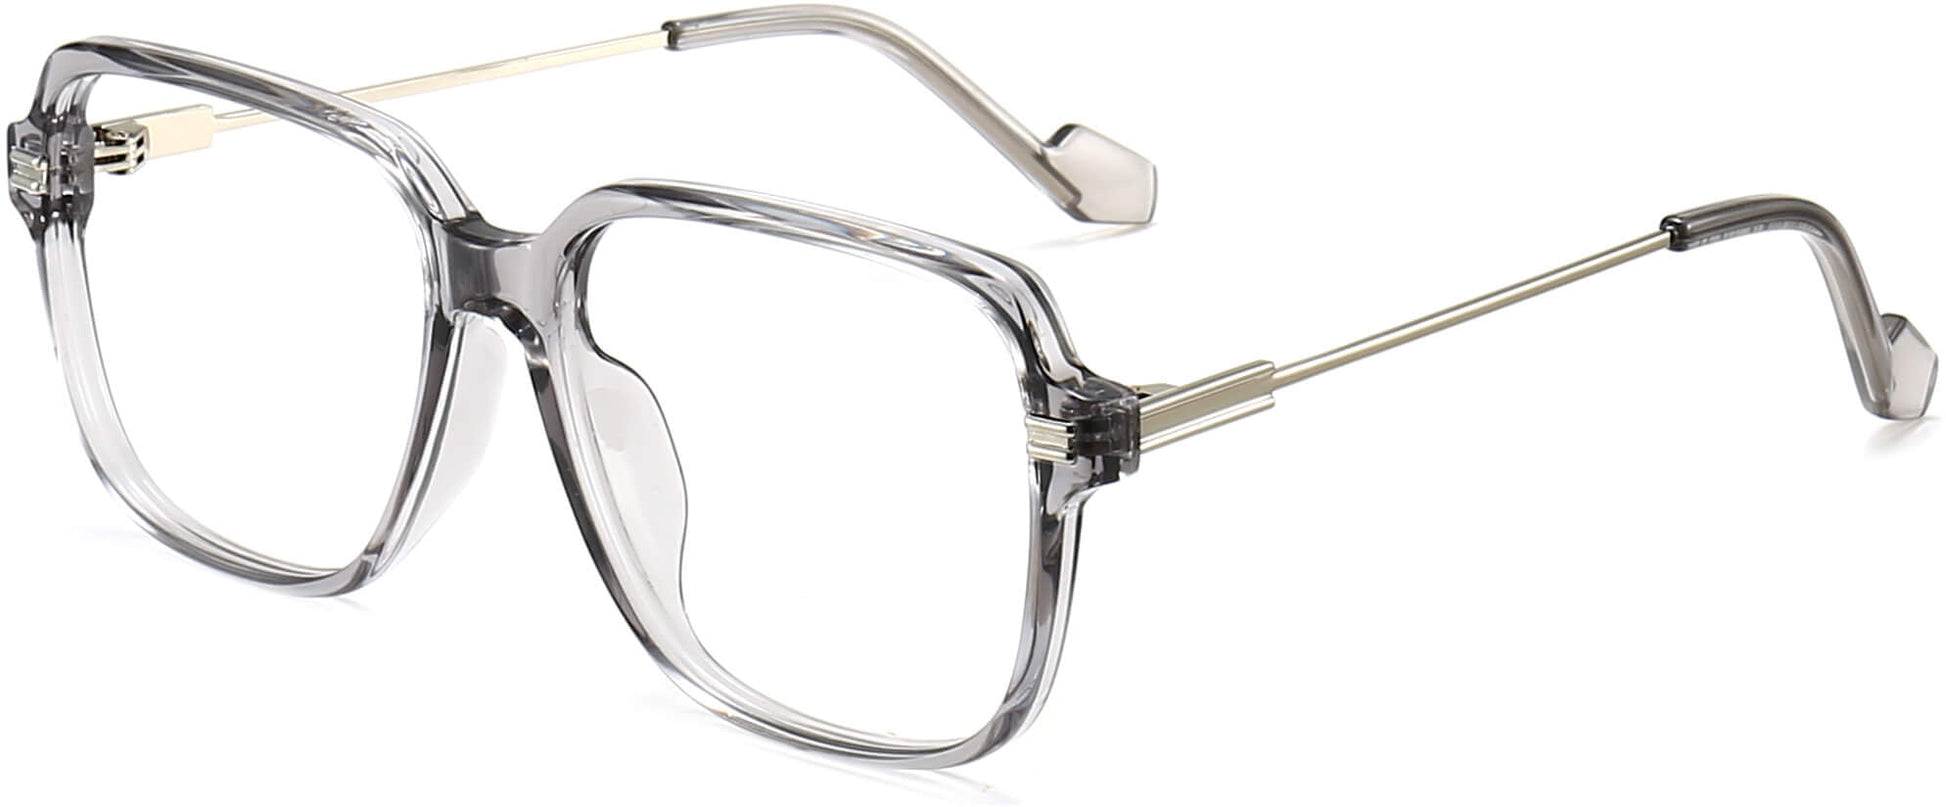 Brixton Square Gray Eyeglasses from ANRRI, angle view